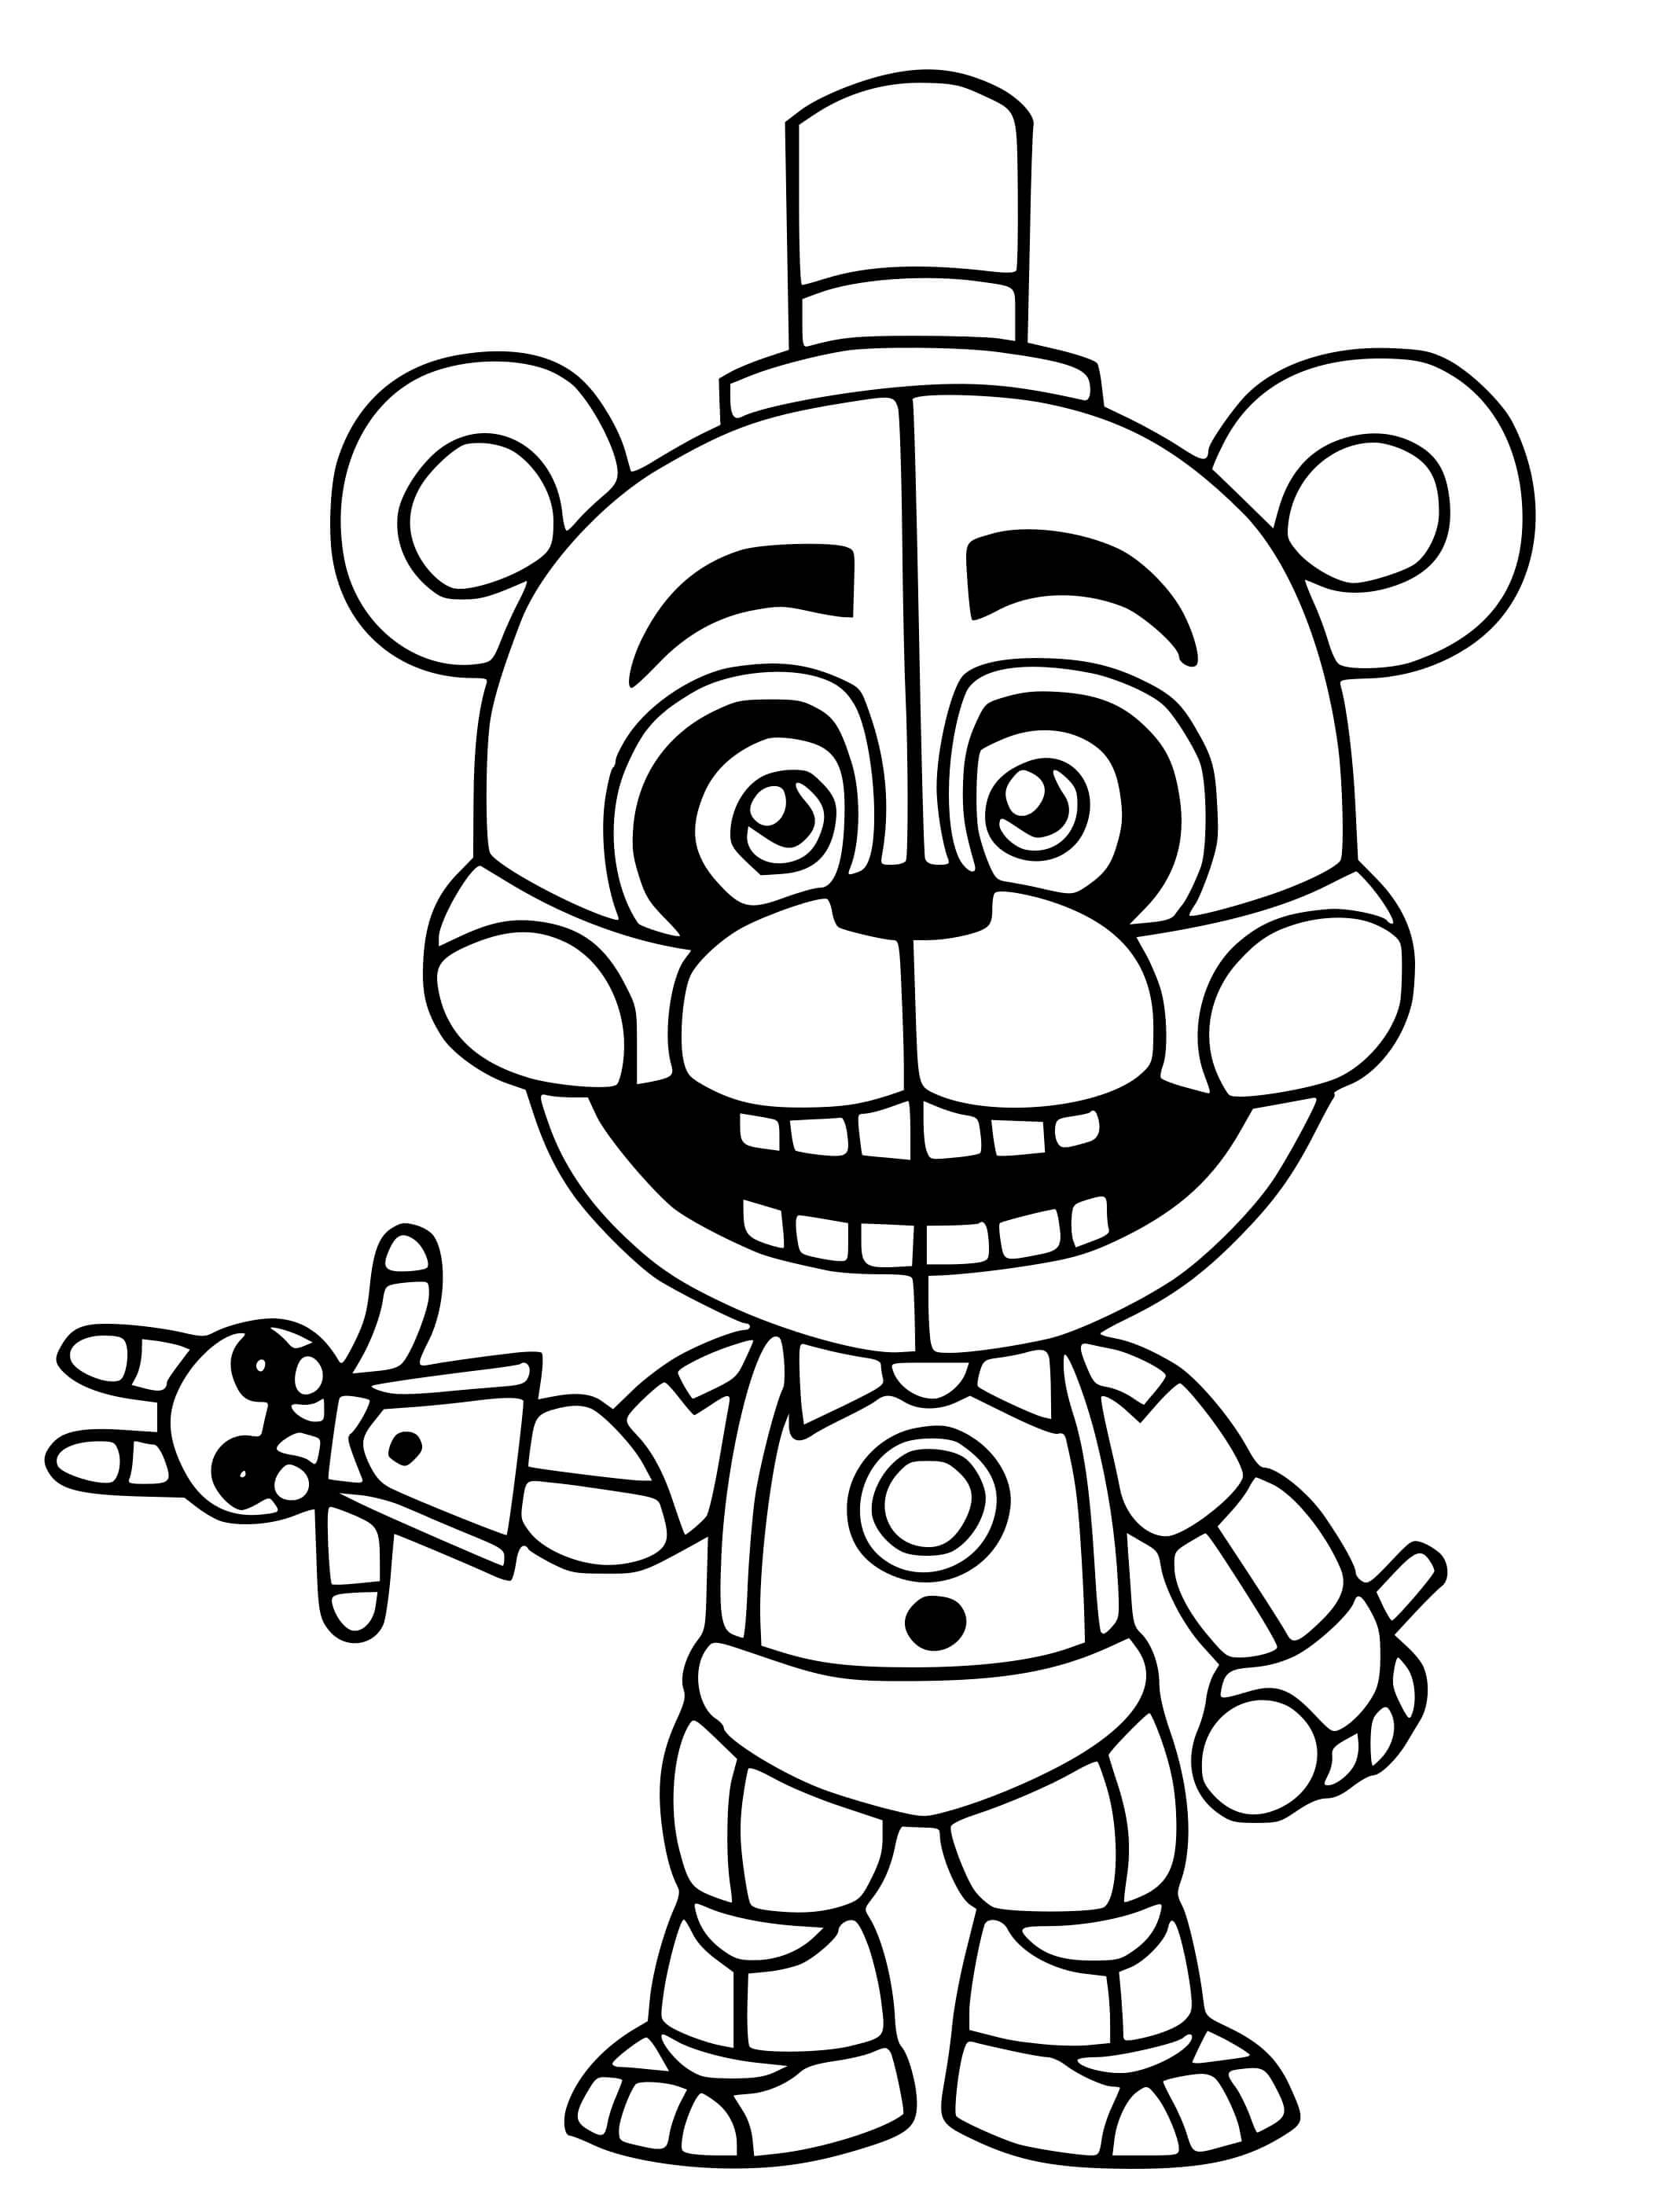 Freddy 2 Coloring Page